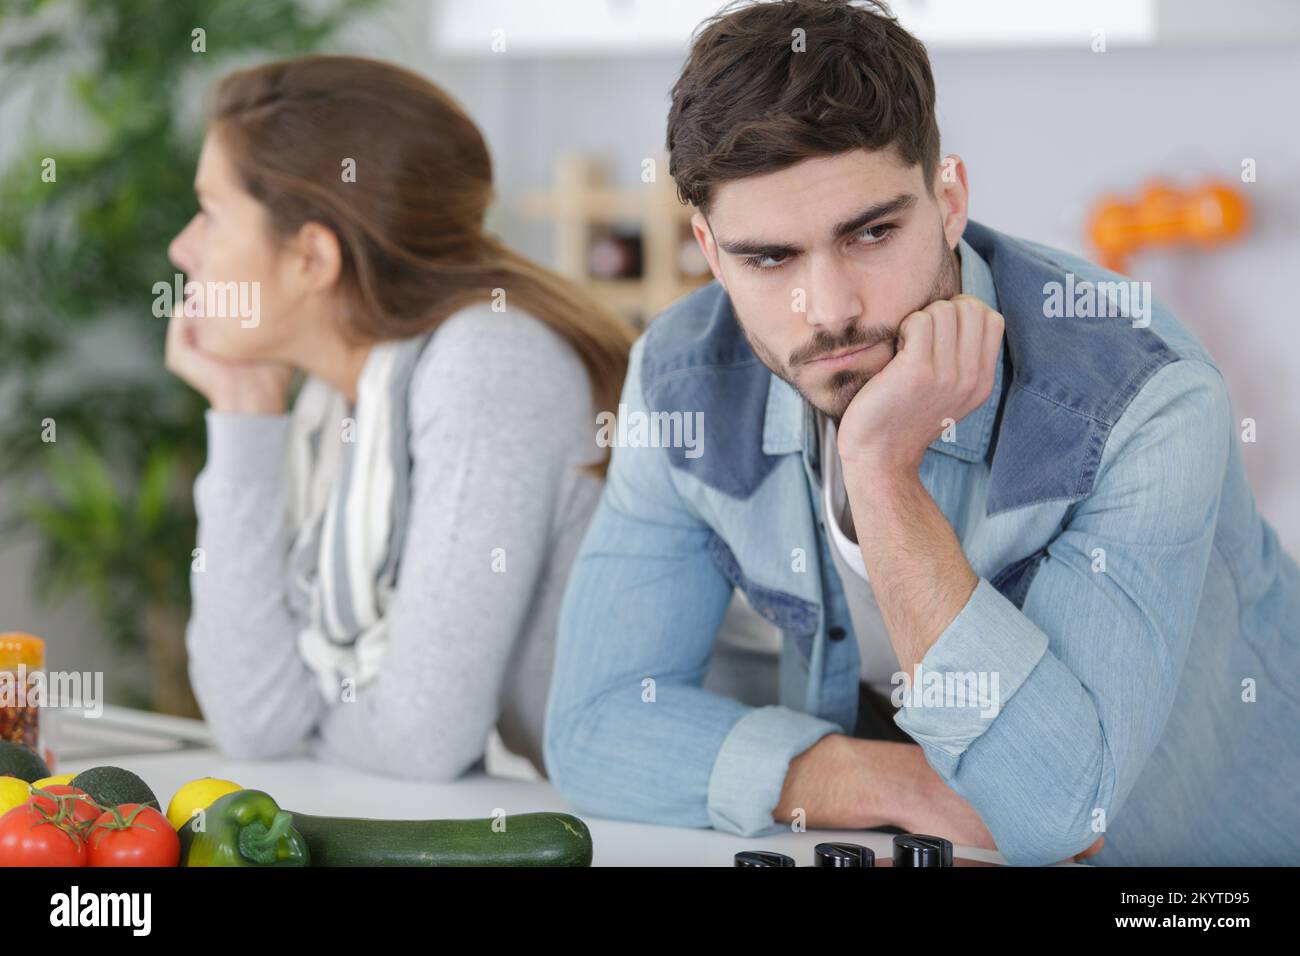 couple in kitchen ignoring each other after an argument Stock Photo